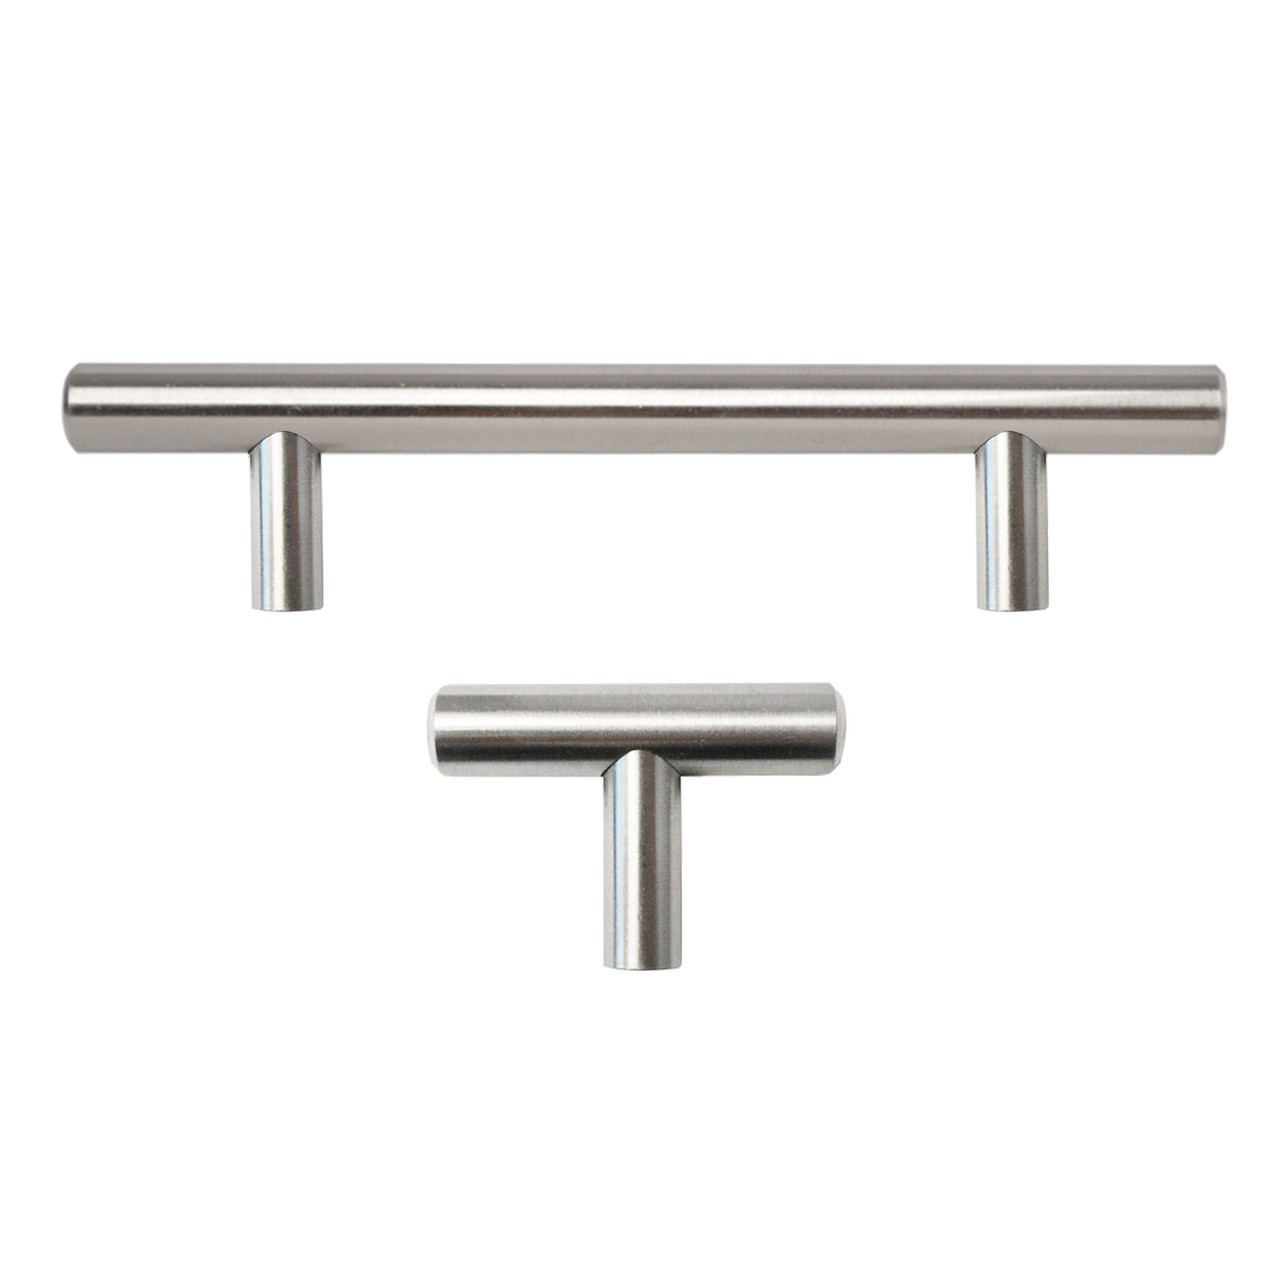 Stainless Steel Kitchen Cabinet Handles T Bar Pulls Hardware European Style Galaxy Cabinetry